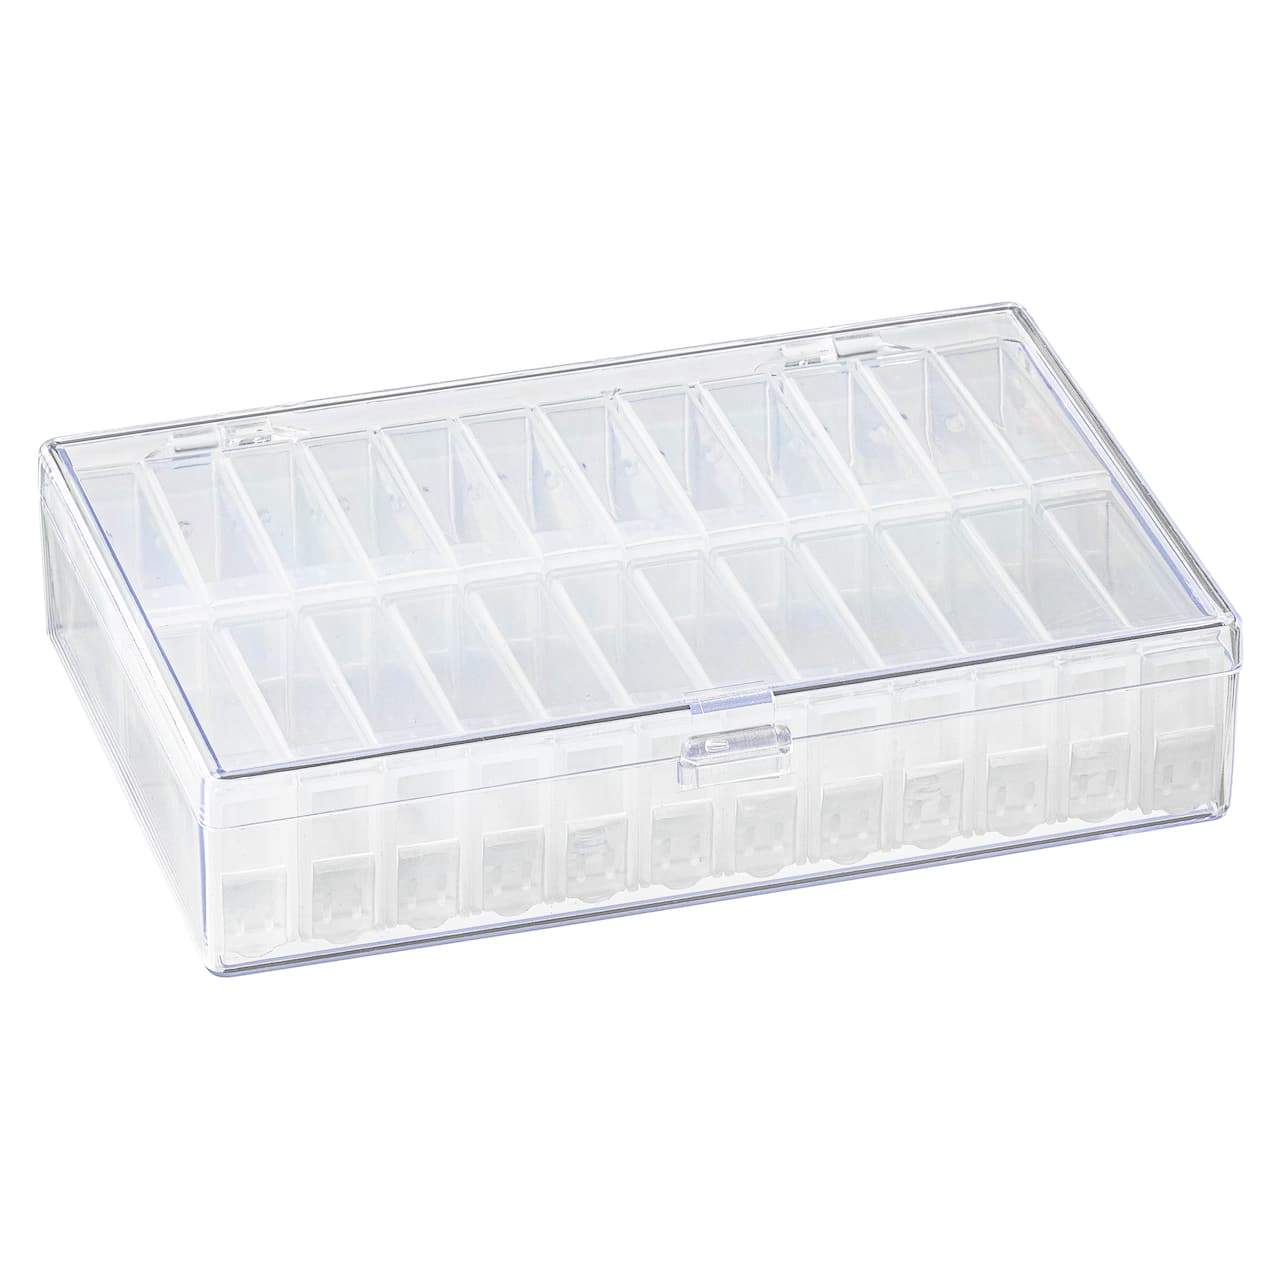 12 Pack: Bead Organizer with Removable Bead Containers by Bead